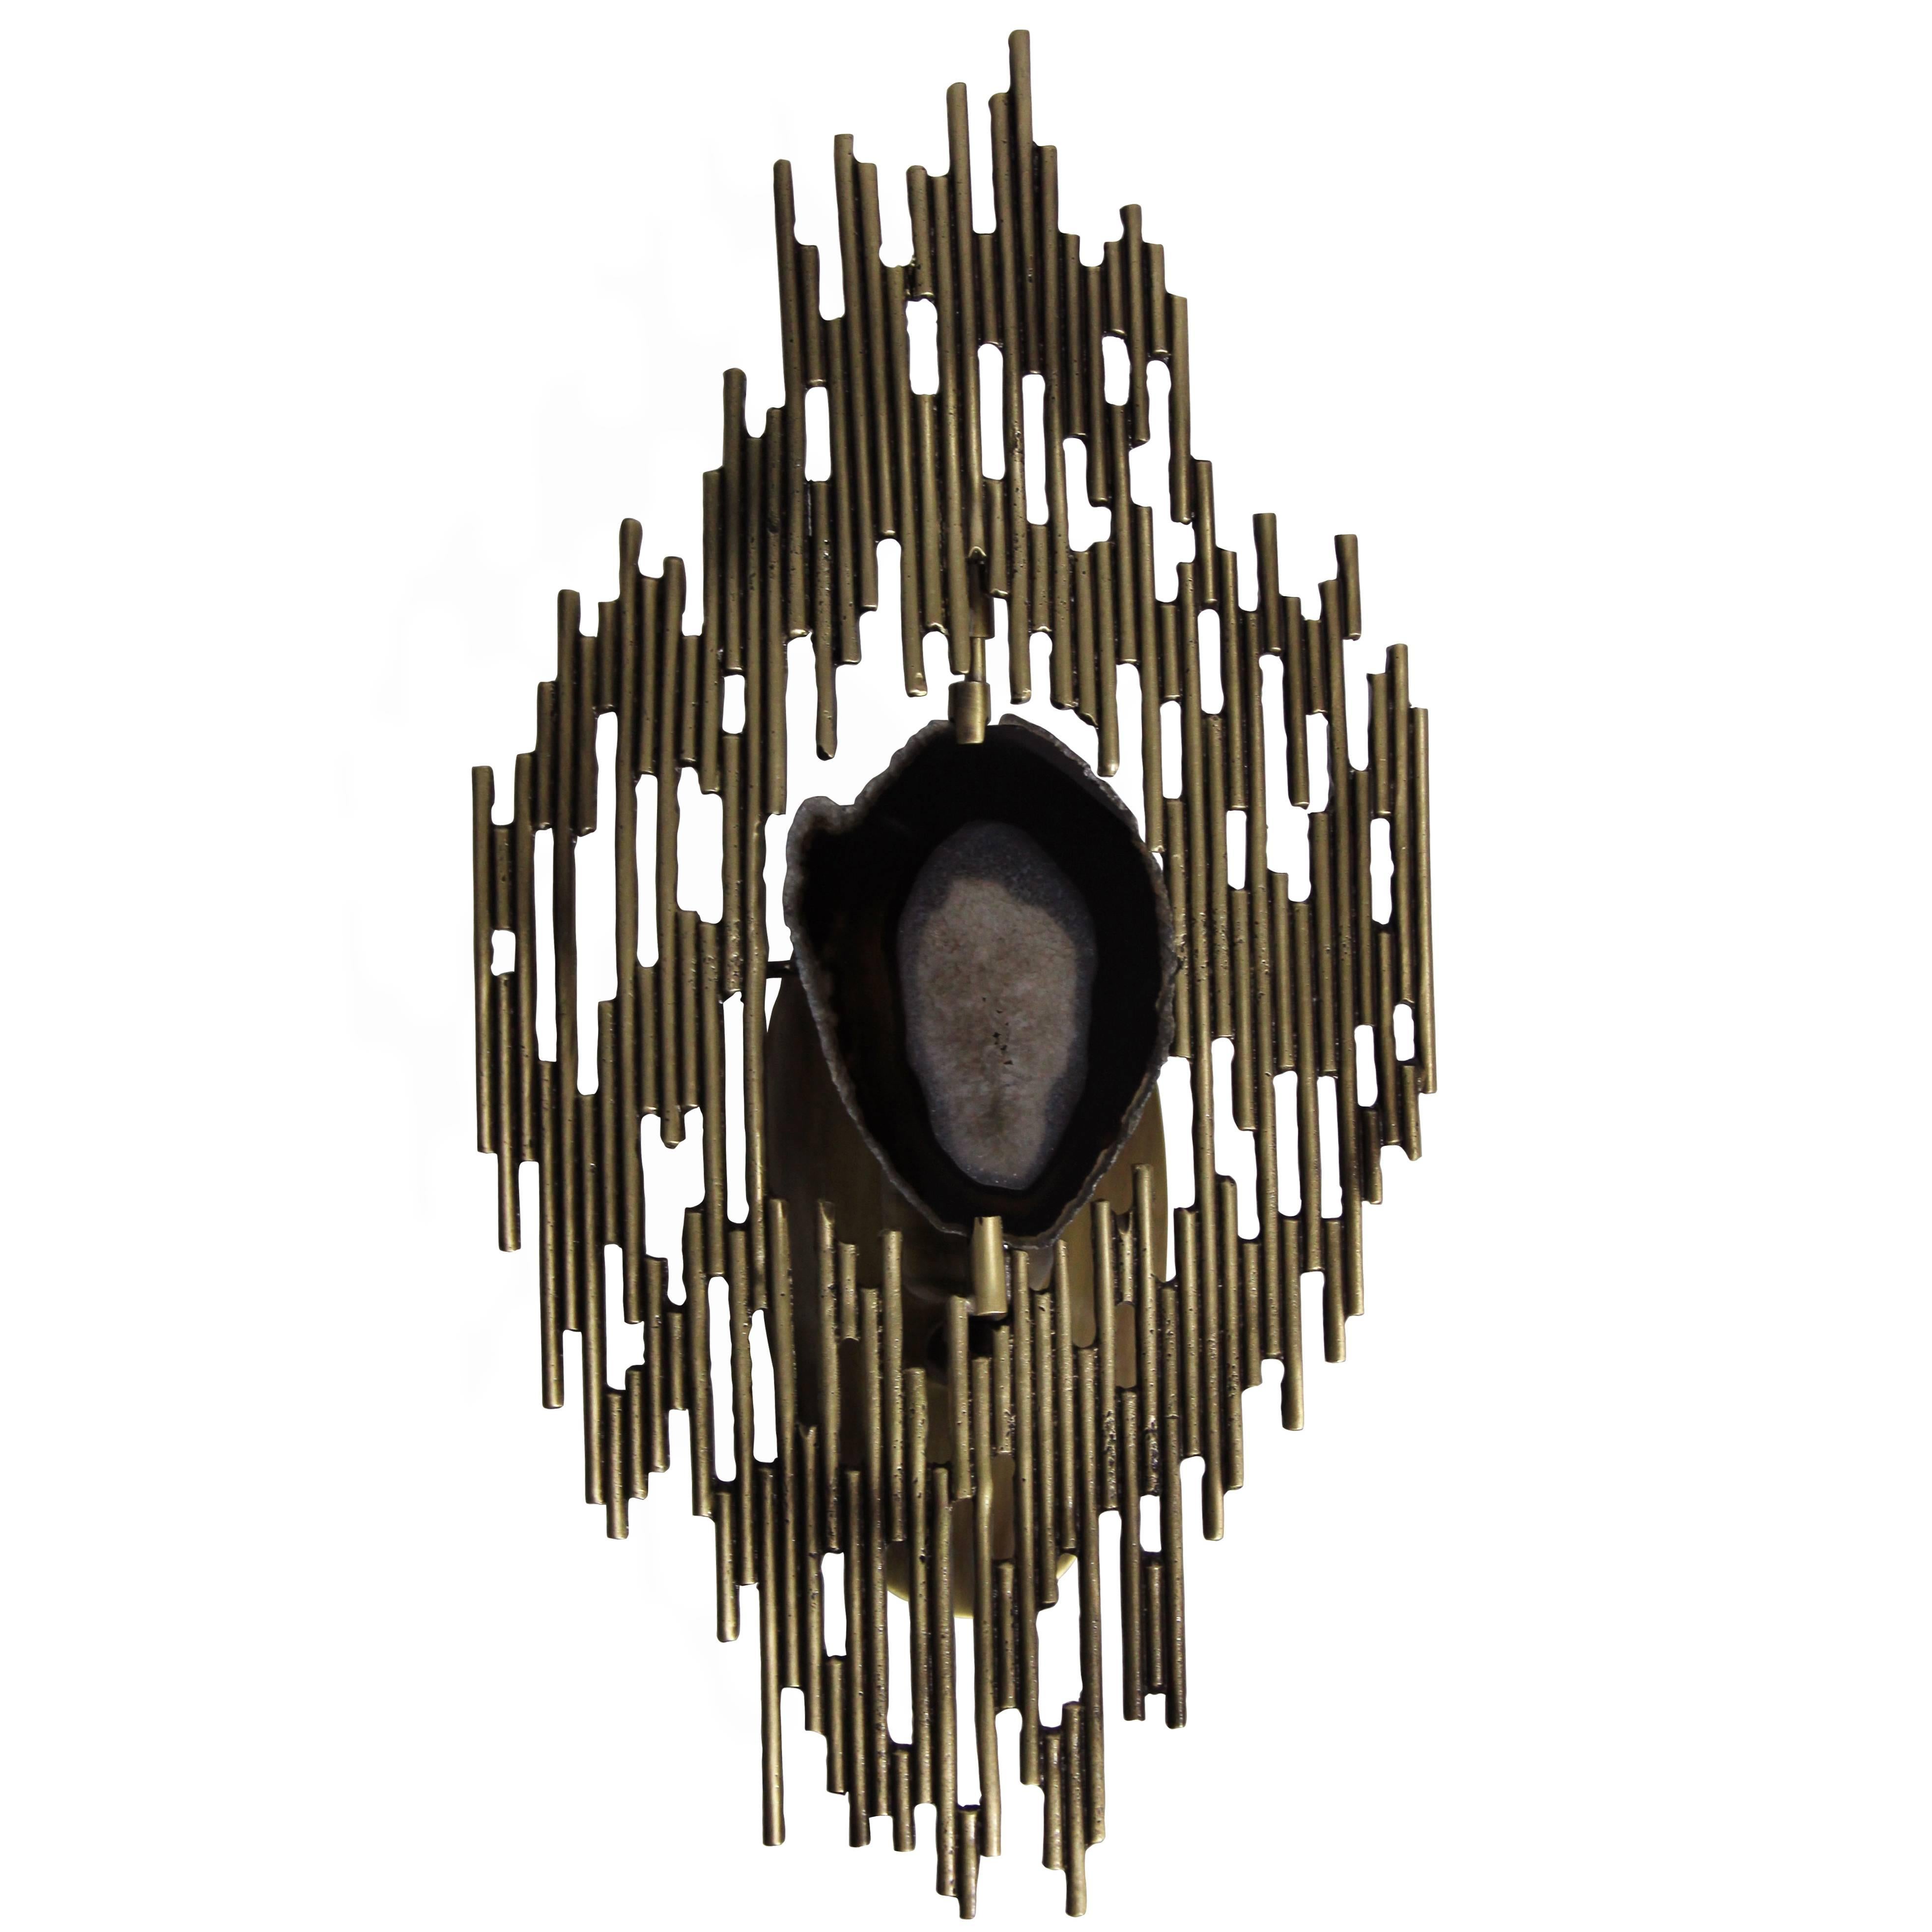 This sconce offers exquisite vintage details with a decidedly modern profile. The dark neutral tones and the exquisite patterns in the agate stone is uniquely captivating against the light and the gold metal which embraces the stone in perfect